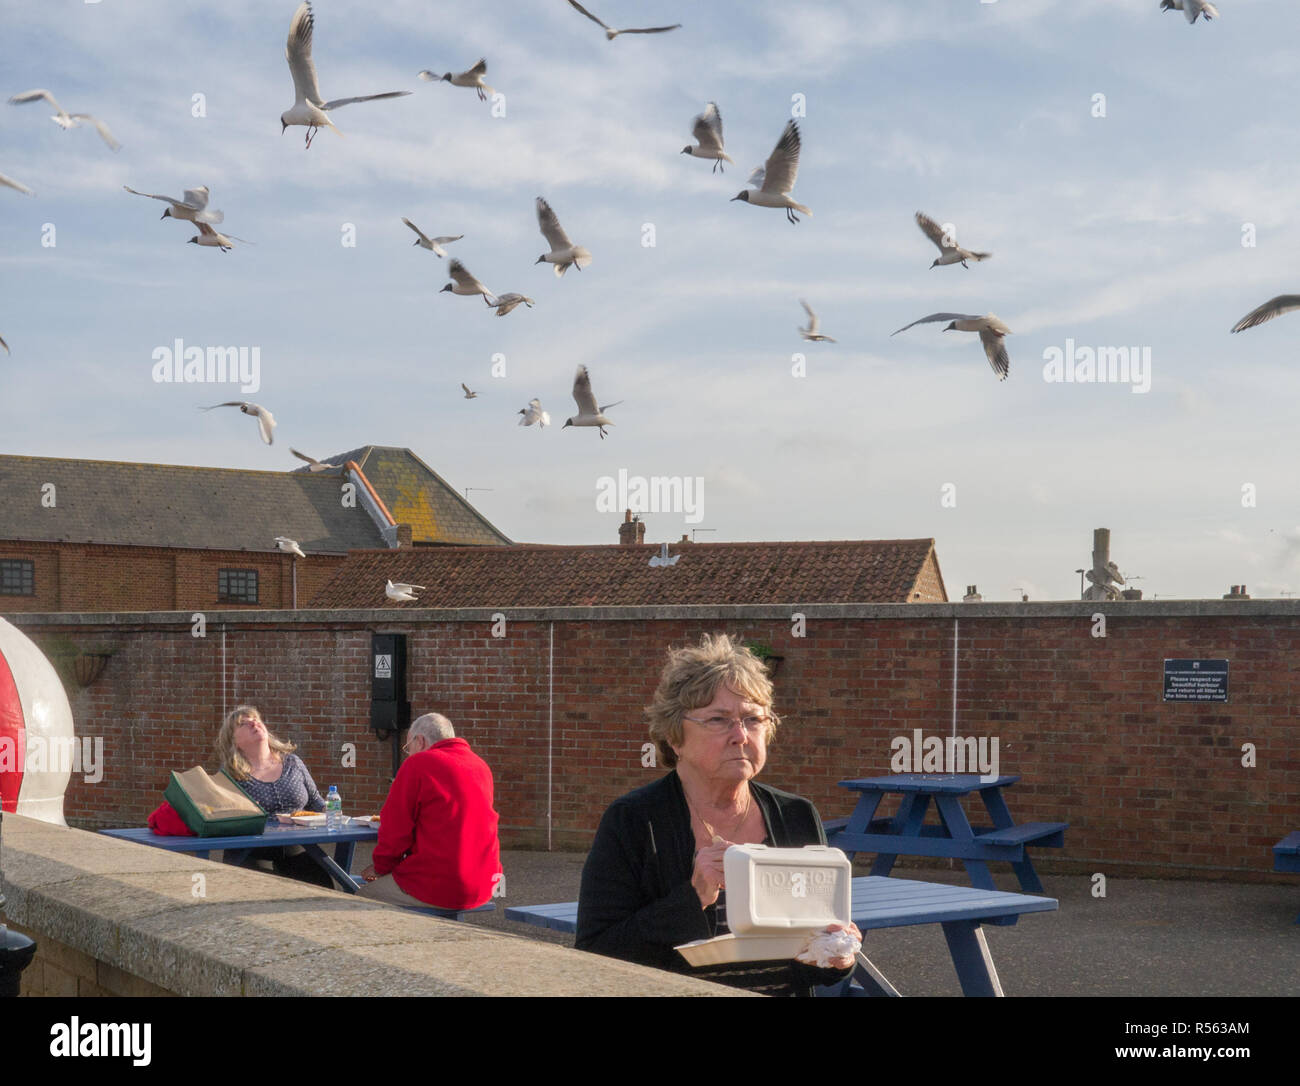 Norfolk, UK - April 26, 2014:  People eating their lunch outdoors and being attacked by seagulls. Stock Photo